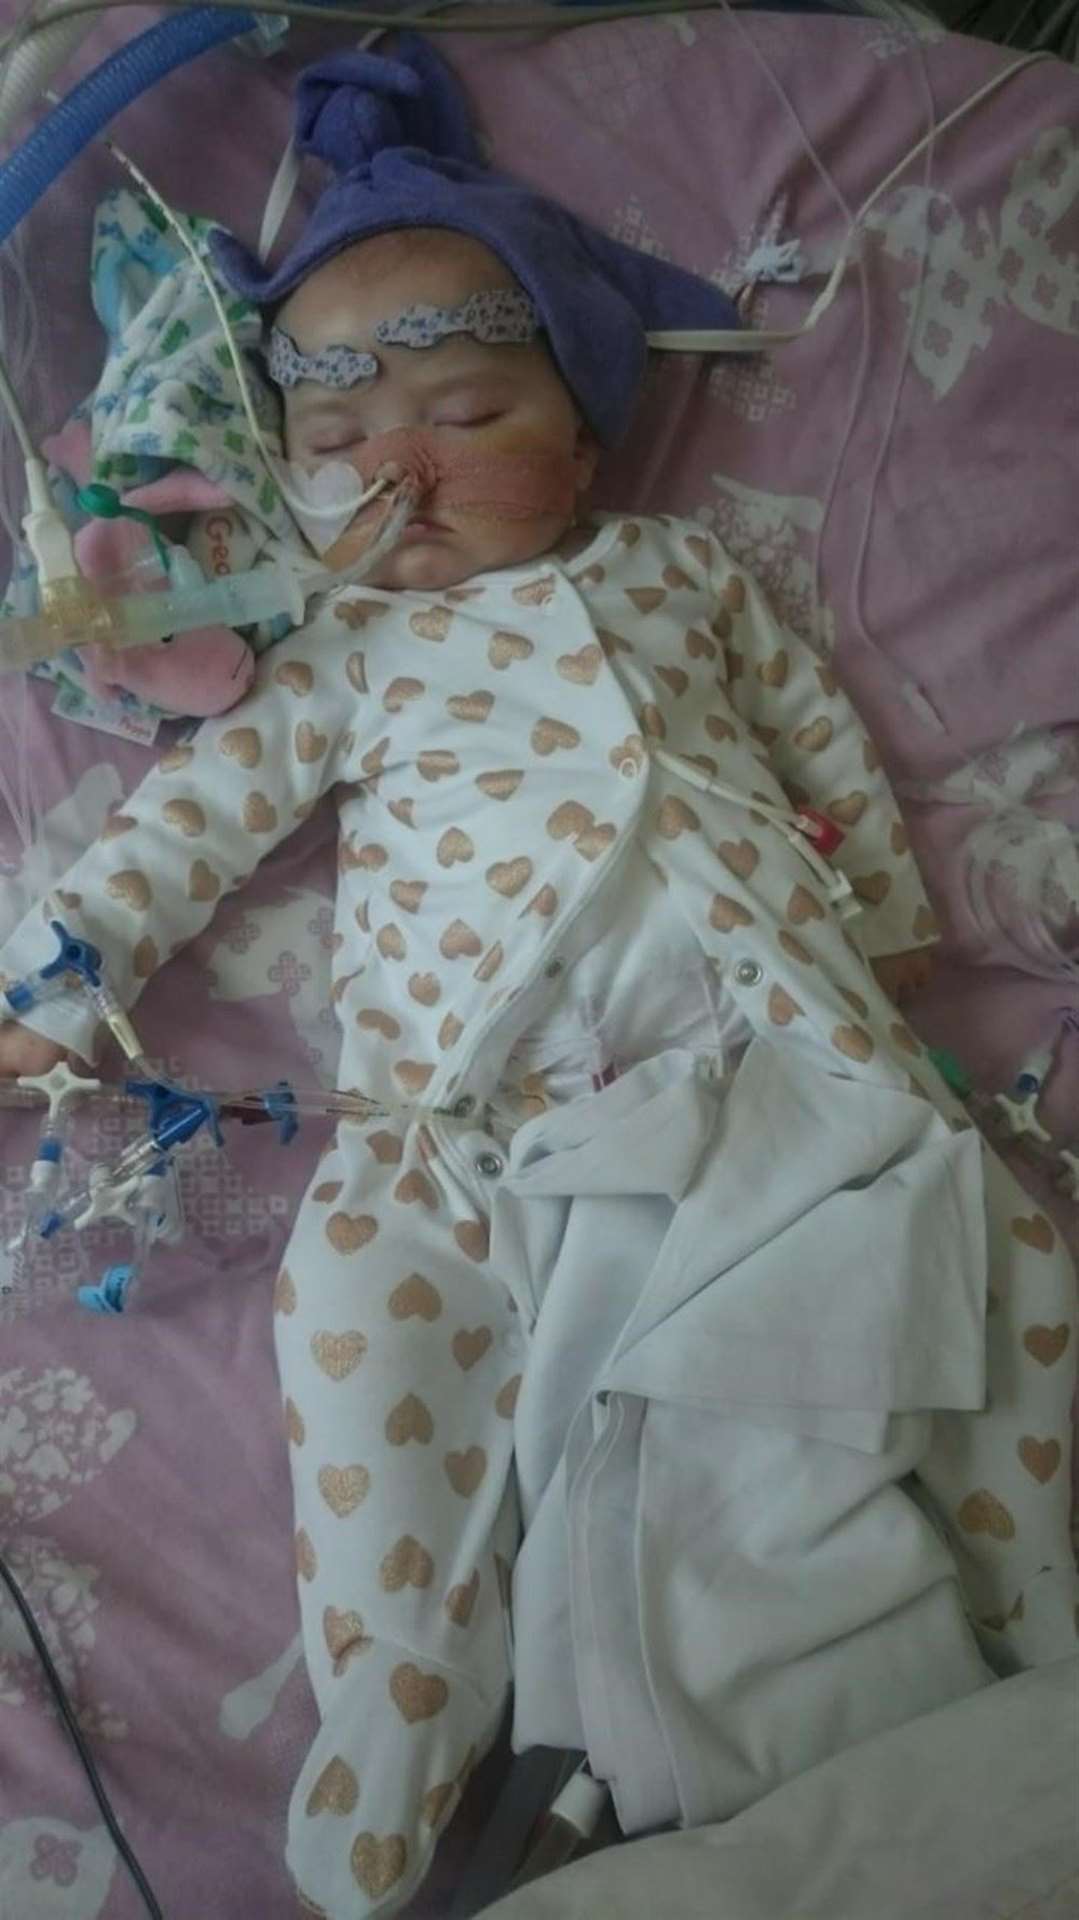 Grace Westwood is being treated at the Freeman Hospital in Newcastle (Newcastle Hospitals NHS Foundation Trust)